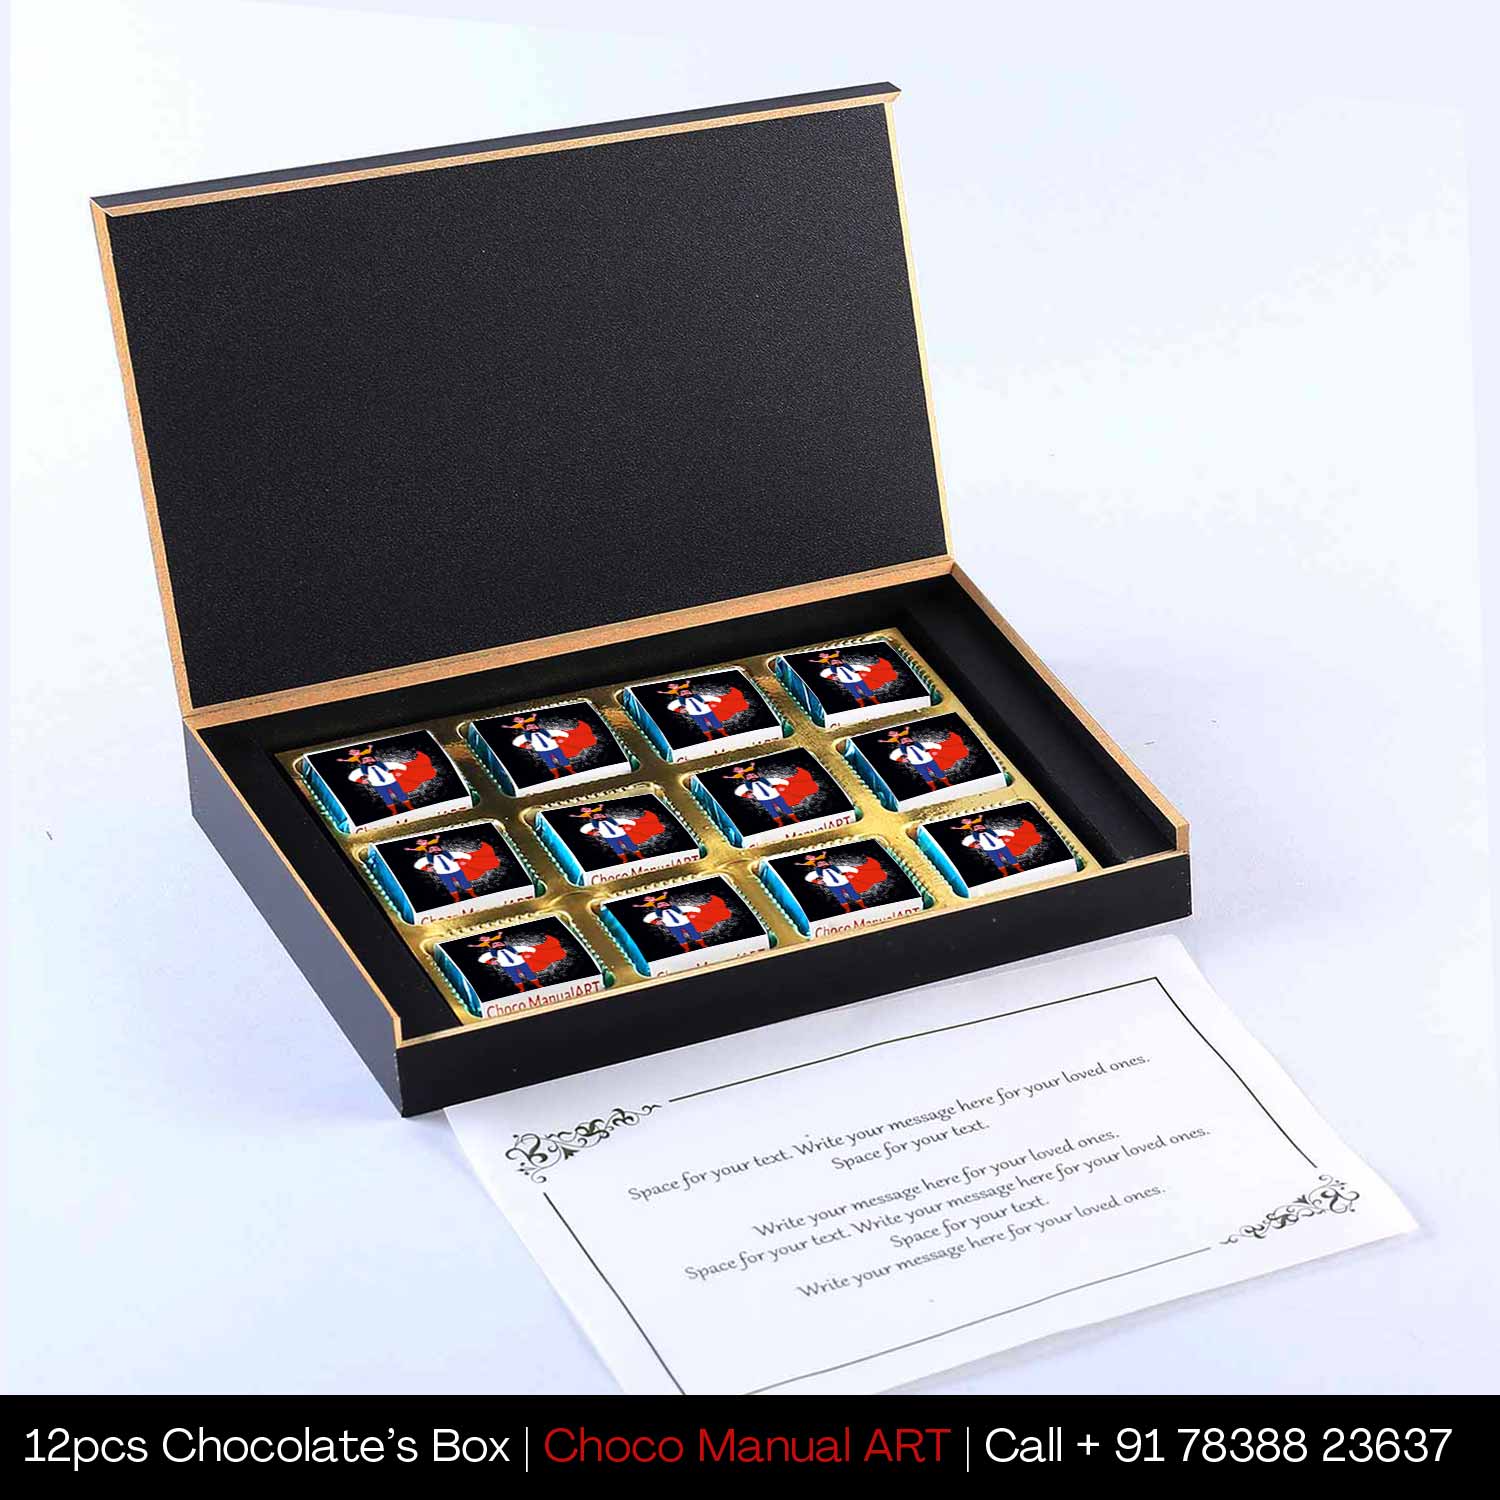 Adorable print box of wrapped Chocolates for father's day